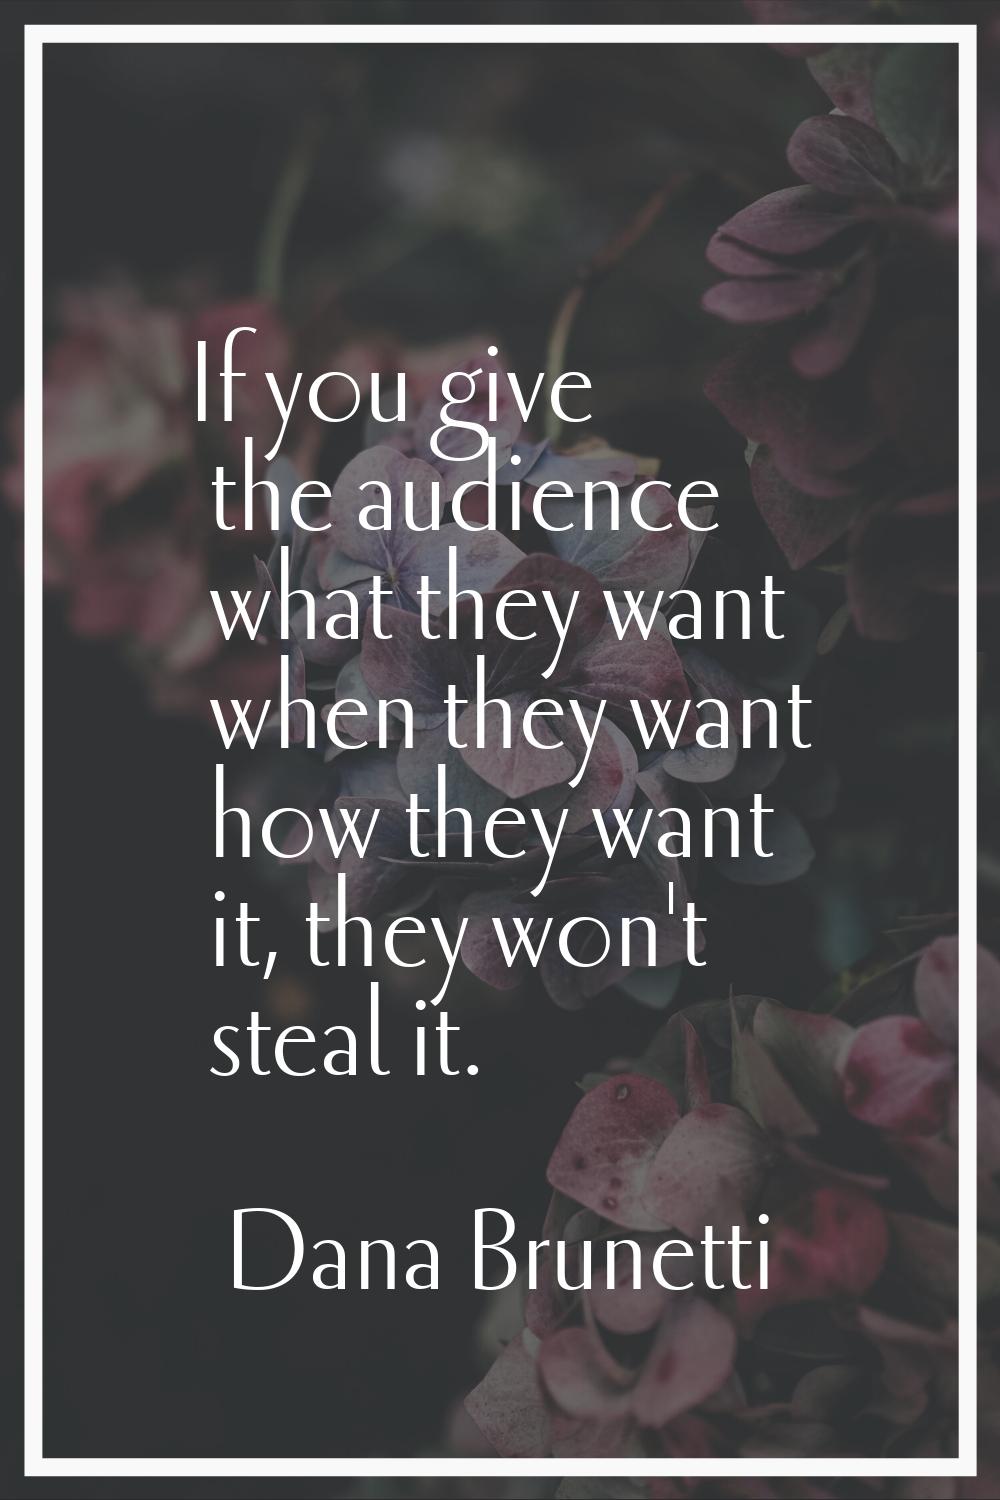 If you give the audience what they want when they want how they want it, they won't steal it.